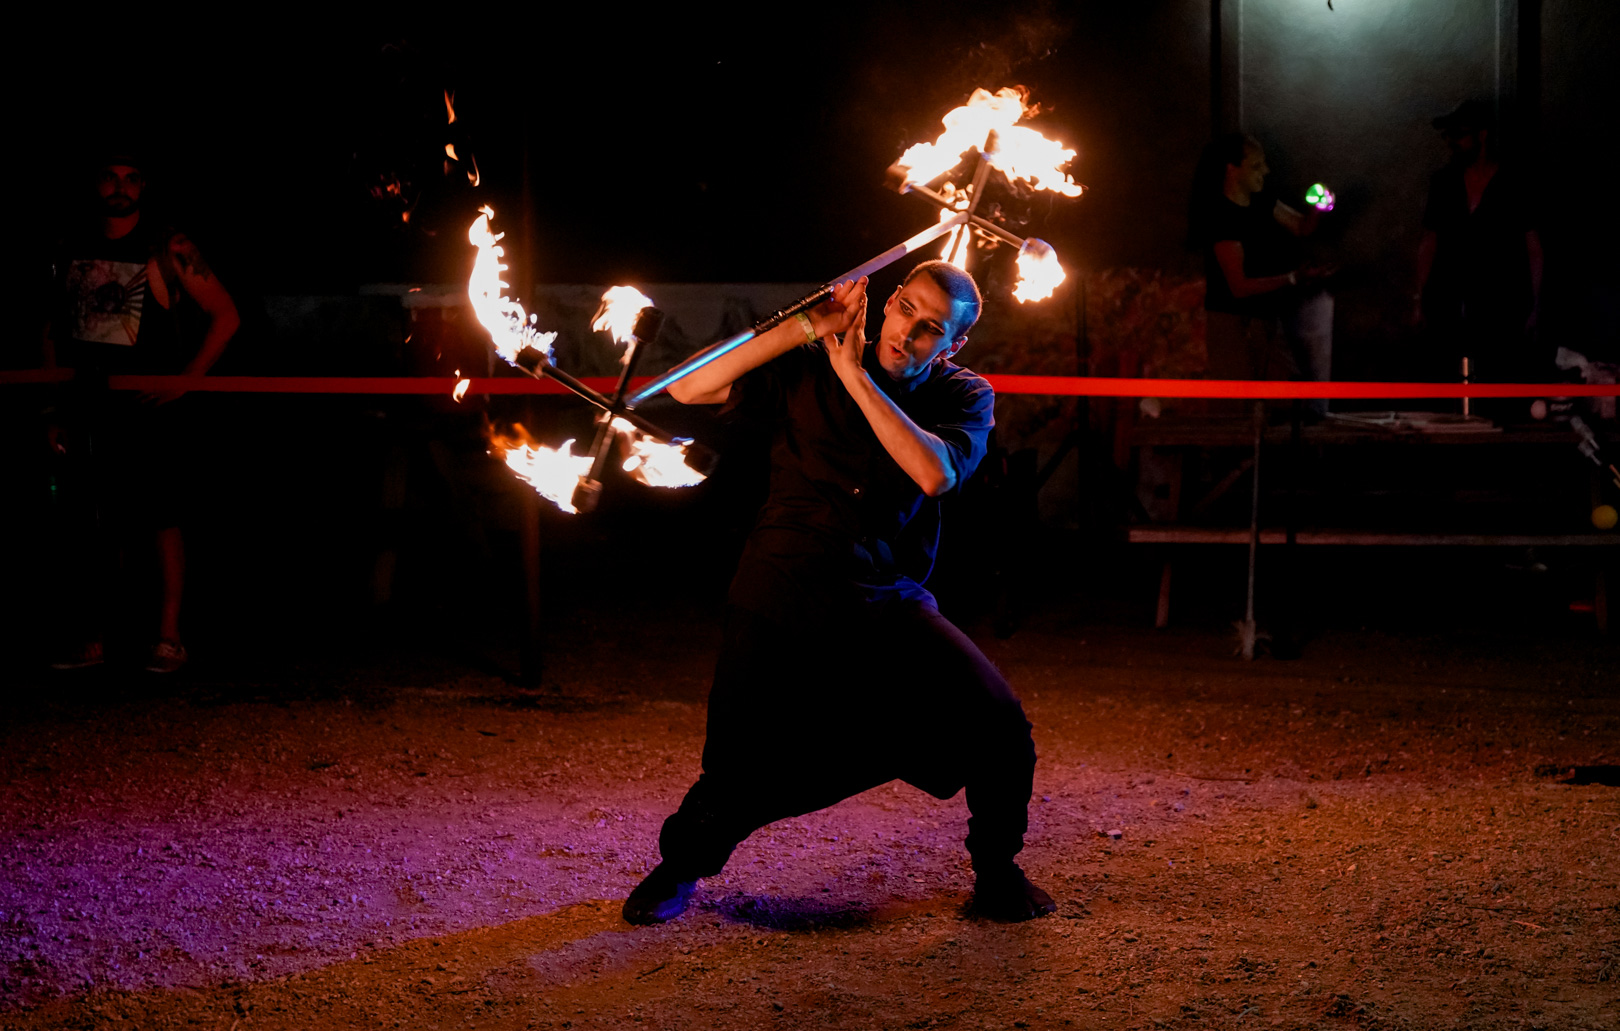 A man fire performing with dragon staff